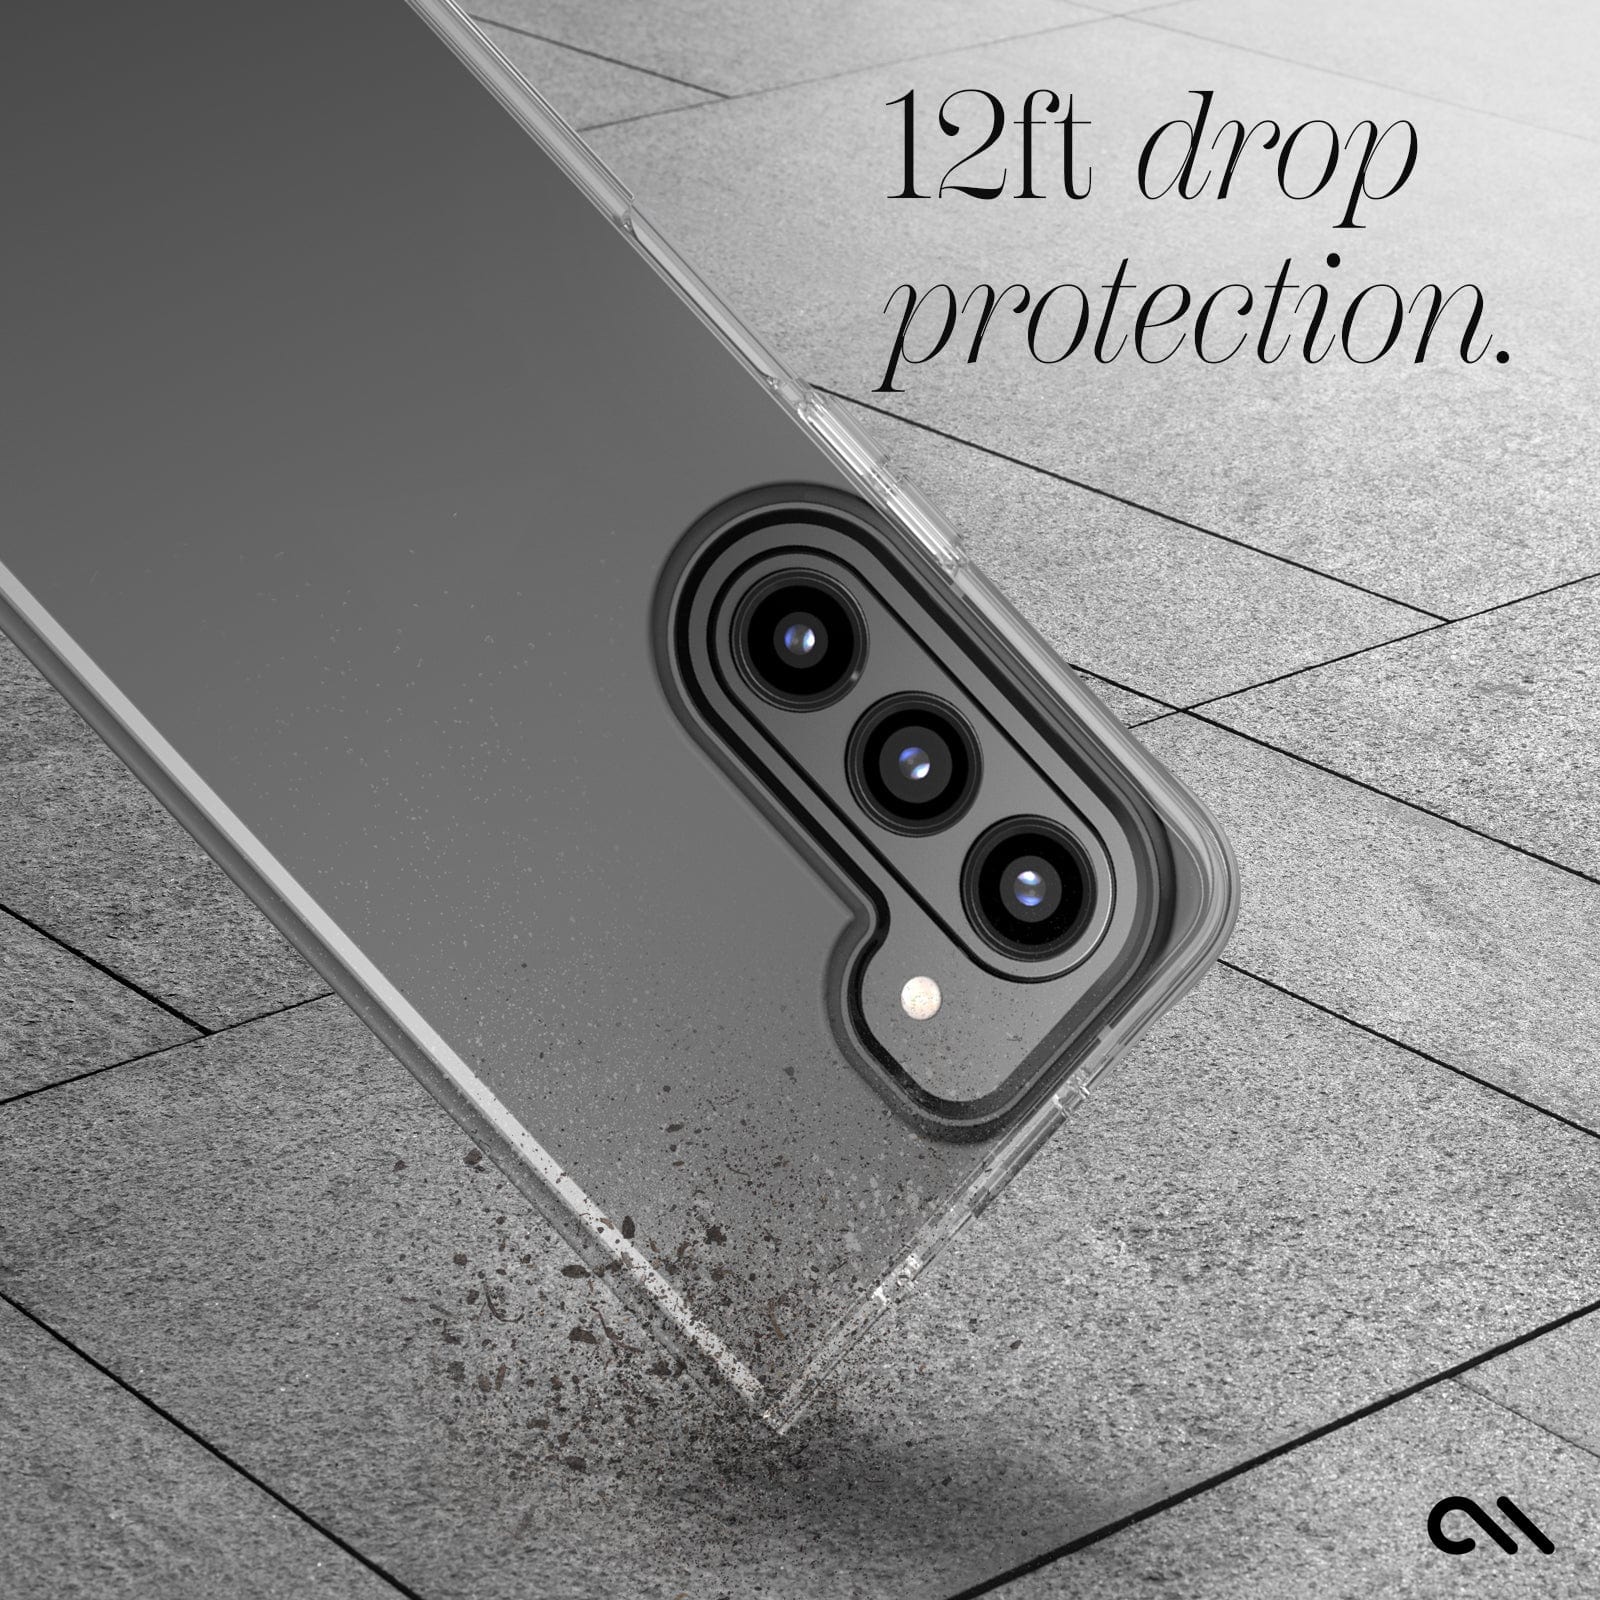 12FT DROP PROTECTION